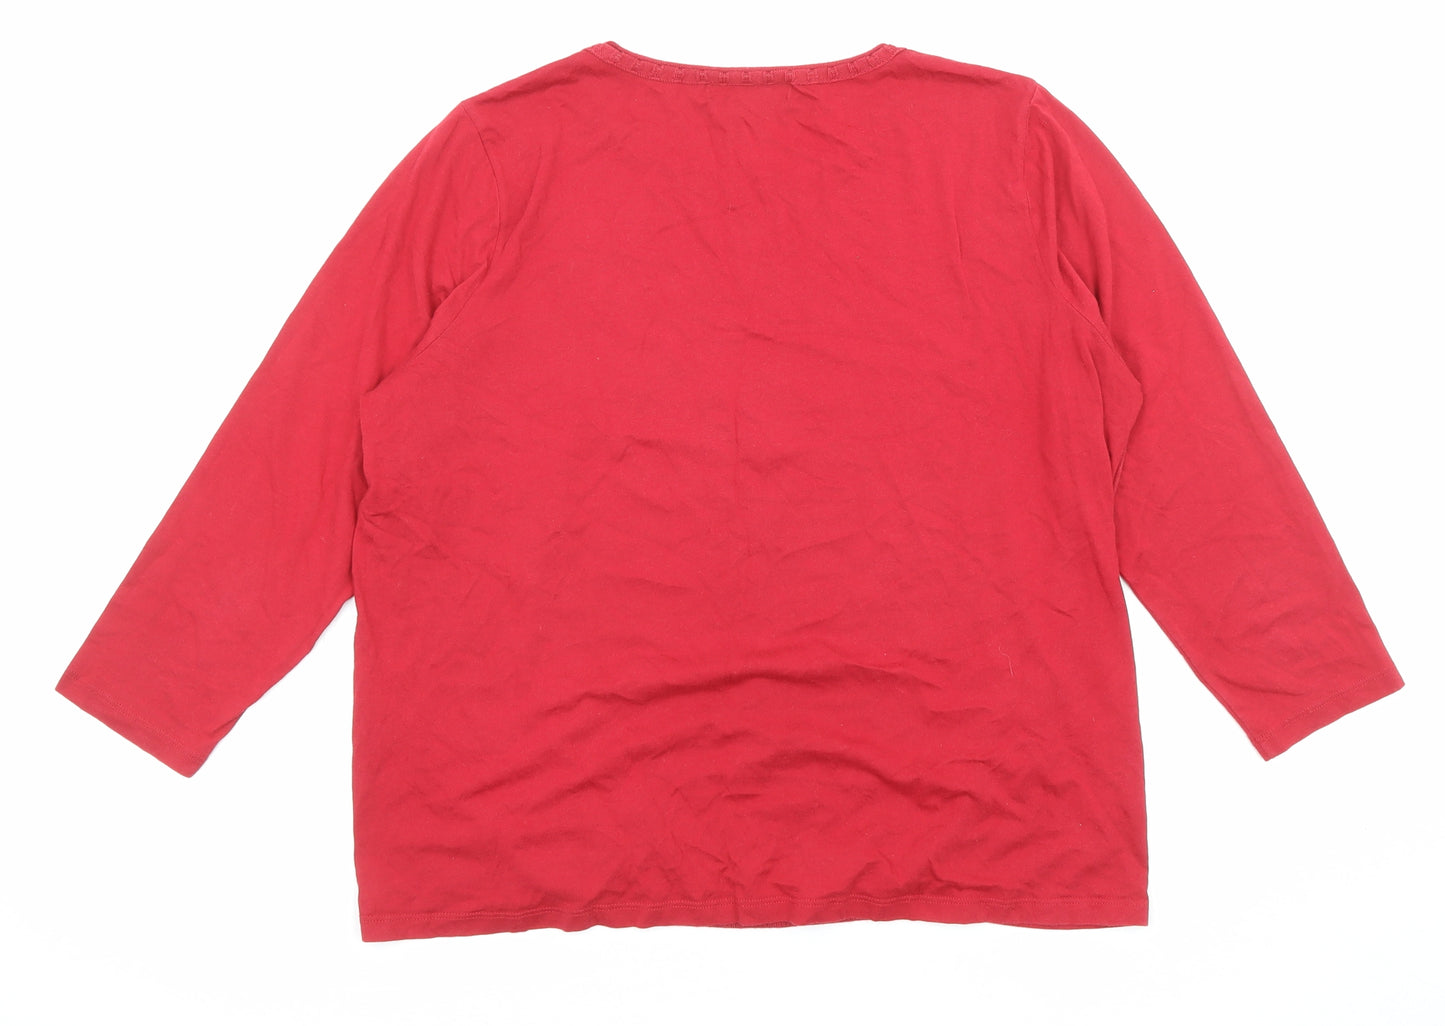 Laura Ashley Womens Red Cotton Basic Blouse Size 14 Roll Neck